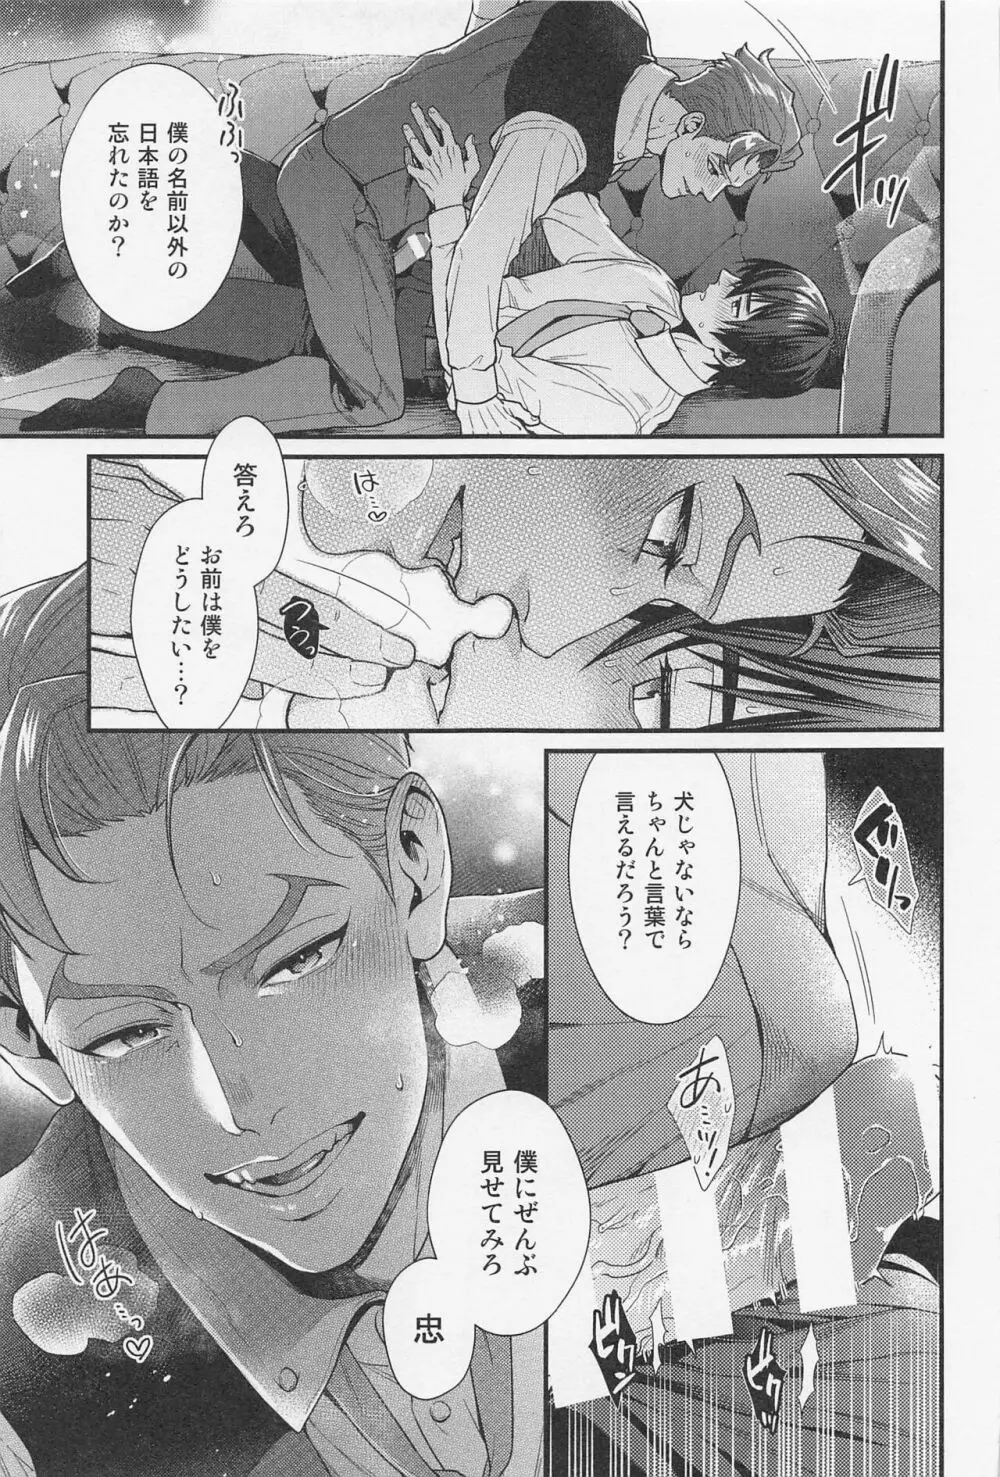 LOVE FIXED POINT - 愛の定点観測 Page.12